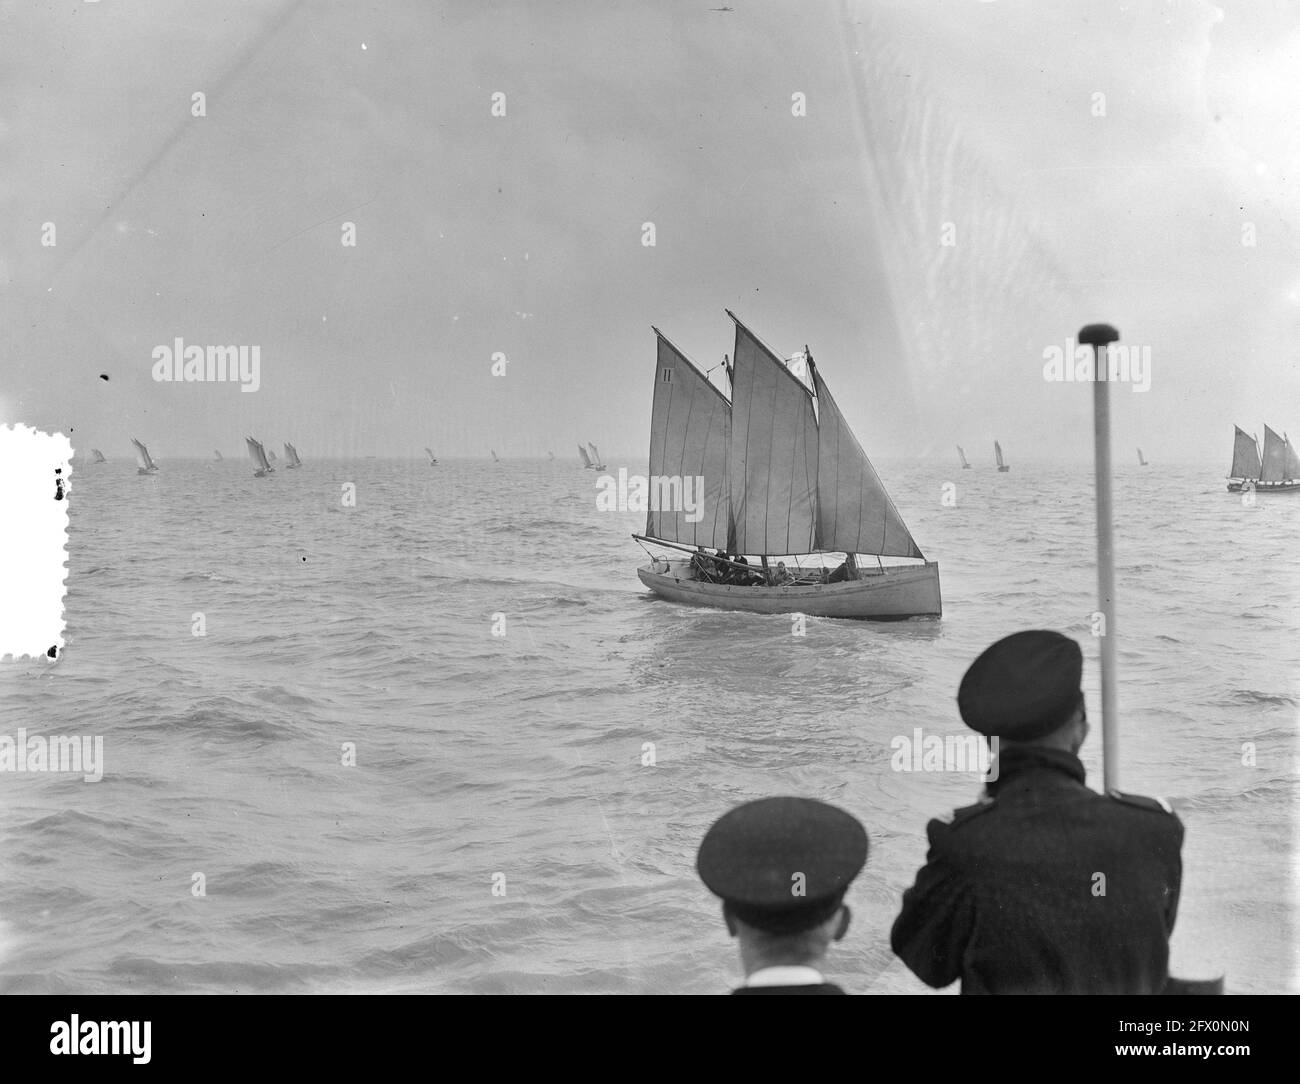 Sailing contest of the Royal Navy Colonel Bax, October 24, 1952, MARINE, sailing contests, The Netherlands, 20th century press agency photo, news to remember, documentary, historic photography 1945-1990, visual stories, human history of the Twentieth Century, capturing moments in time Stock Photo